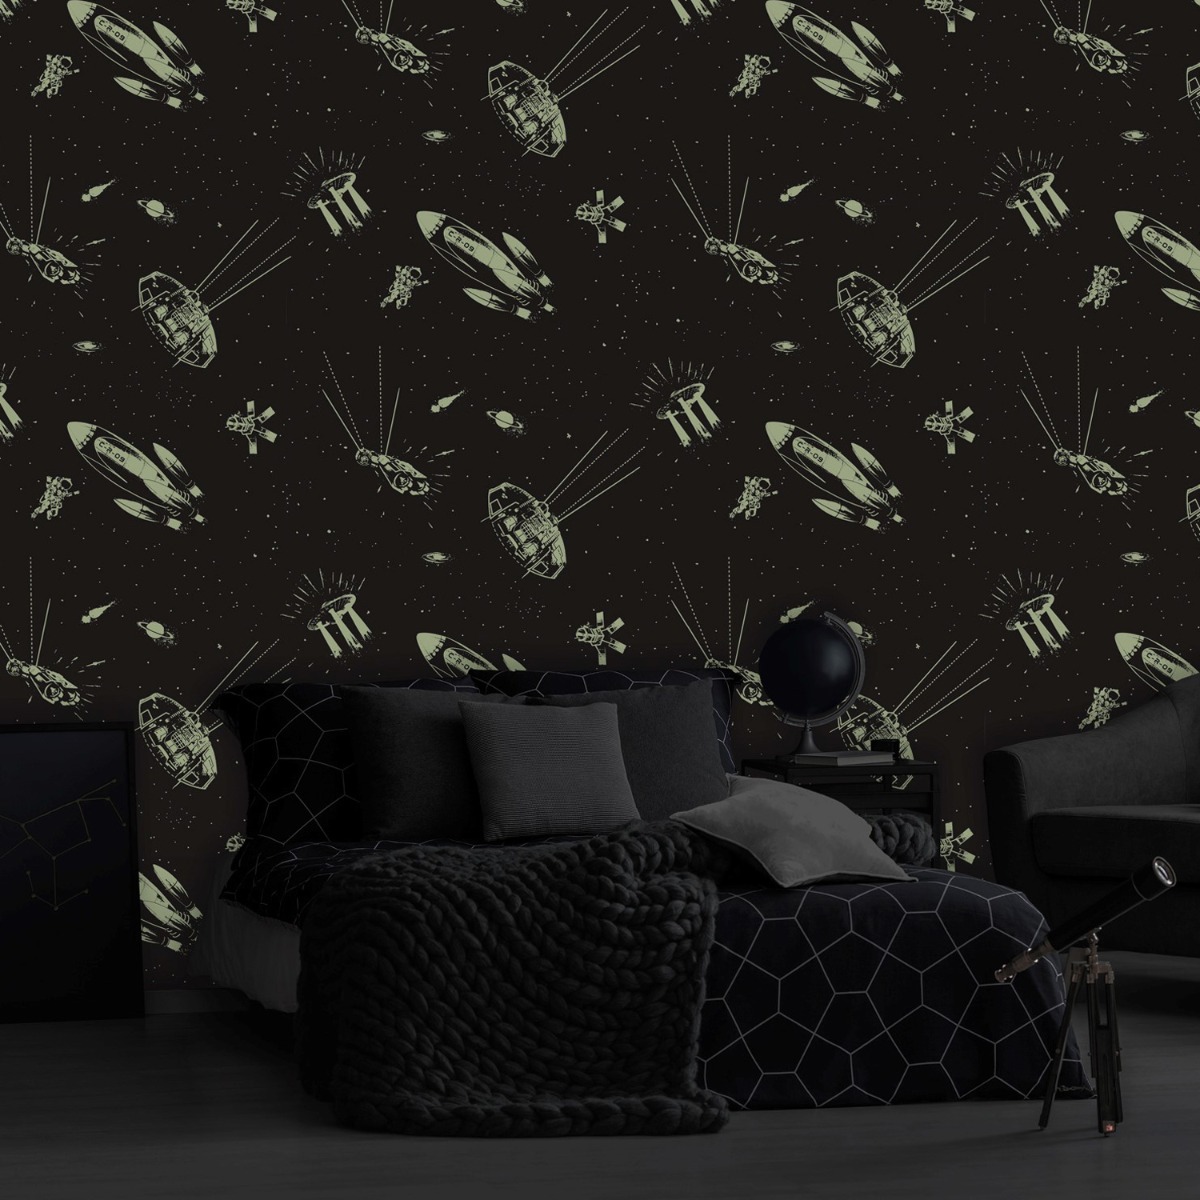 Outer Space Glow in the Dark Wallpaper Blue Belgravia 8800